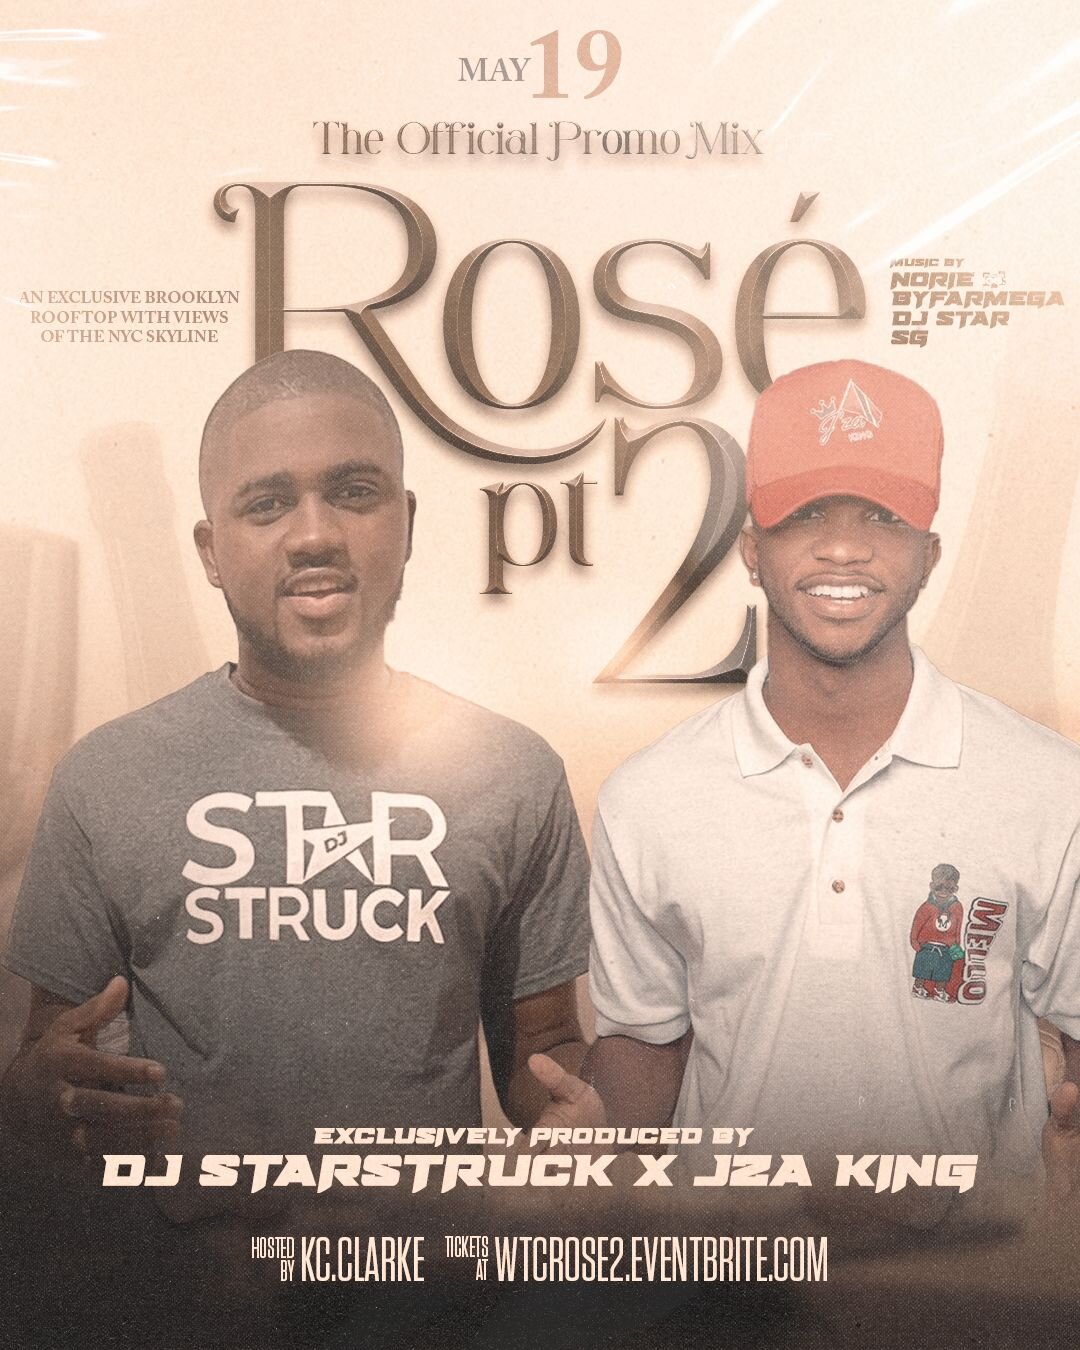 PROVIDING THE VIBES FROM EARLY 🔥 TUNE INTO OUR ROS&Eacute; 2 PROMO MIX FT @starstruck868 @jza_king OUT NOW‼ AVAILABLE ON SOUNDCLOUD AND YOUTUBE LINK IN BIO ‼
 
@wowthatscrazyent Presents
ROS&Eacute; 2: THE EXCLUSIVE CHAMPAGNE ROOFTOP TO 
KICK-OFF TH